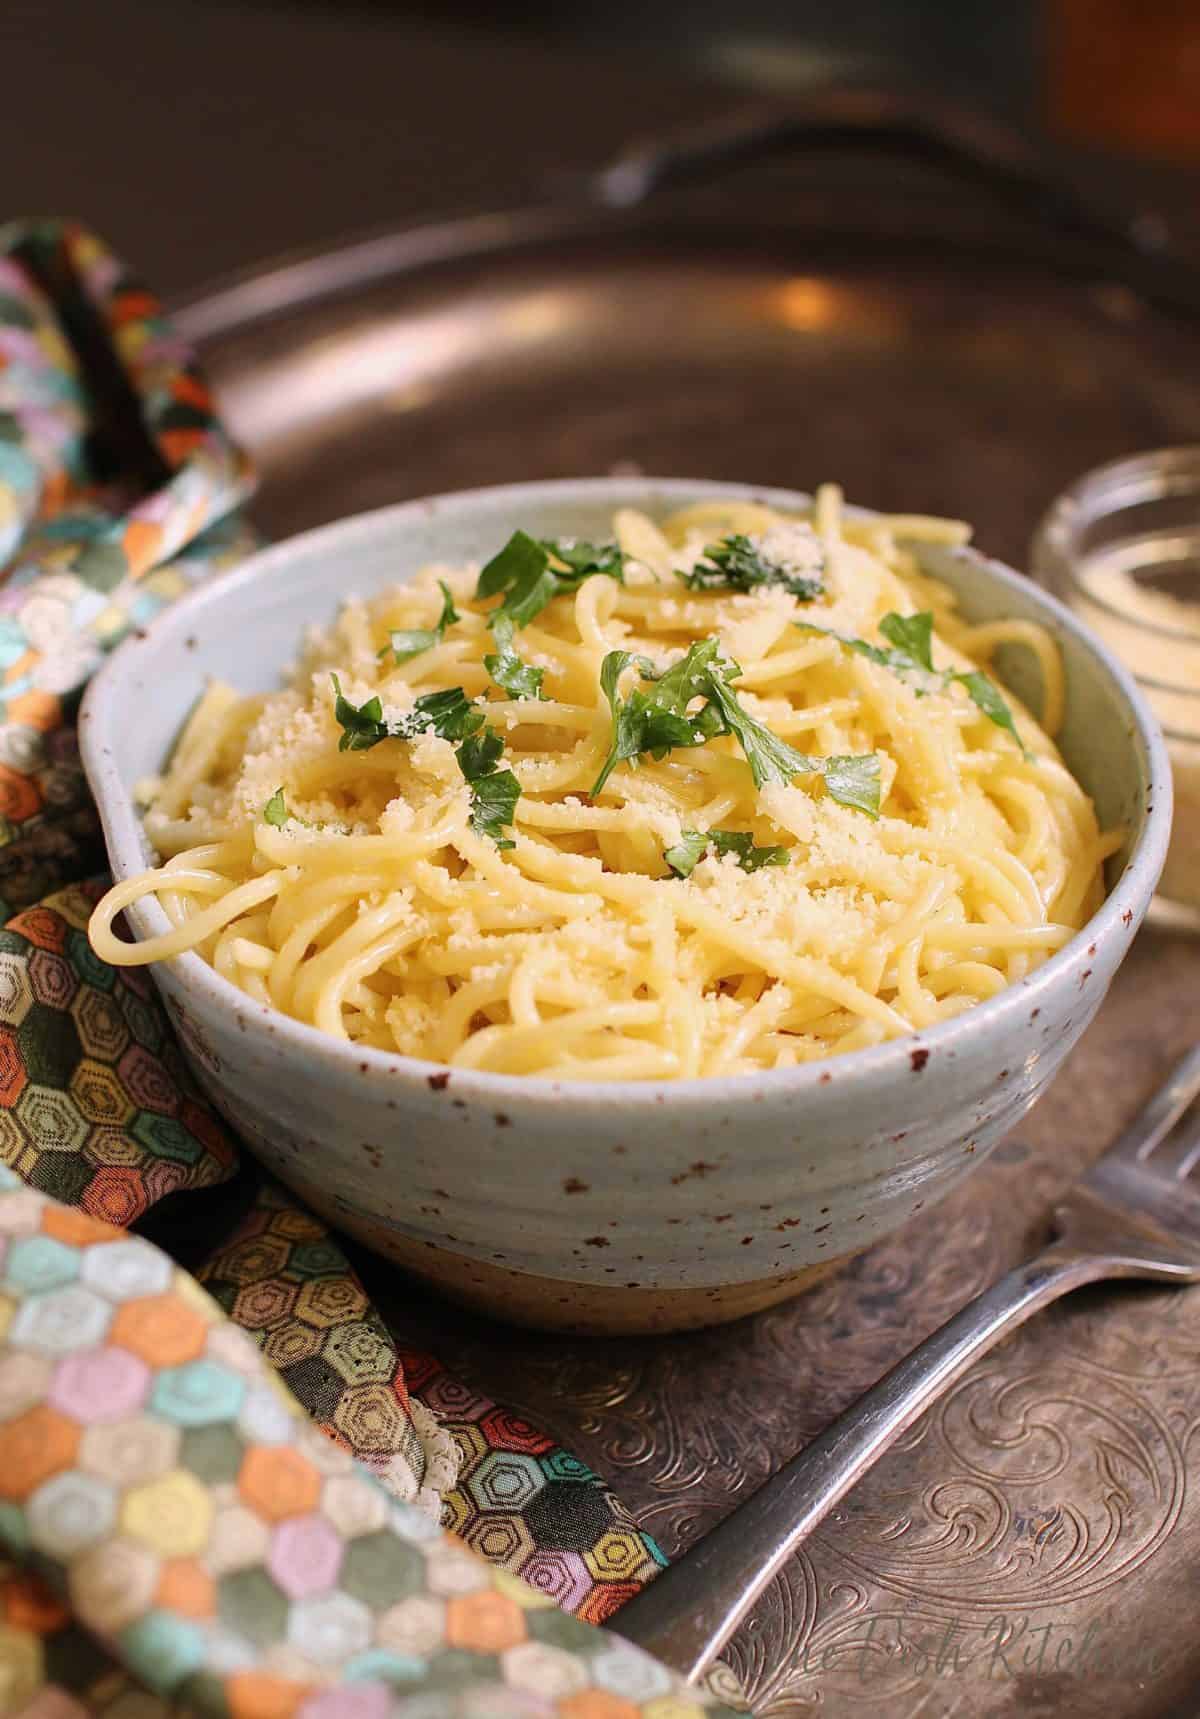 Spaghetti noodles topped with parmesan cheese and chopped parsley in a bowl next to a fork on a metal tray.